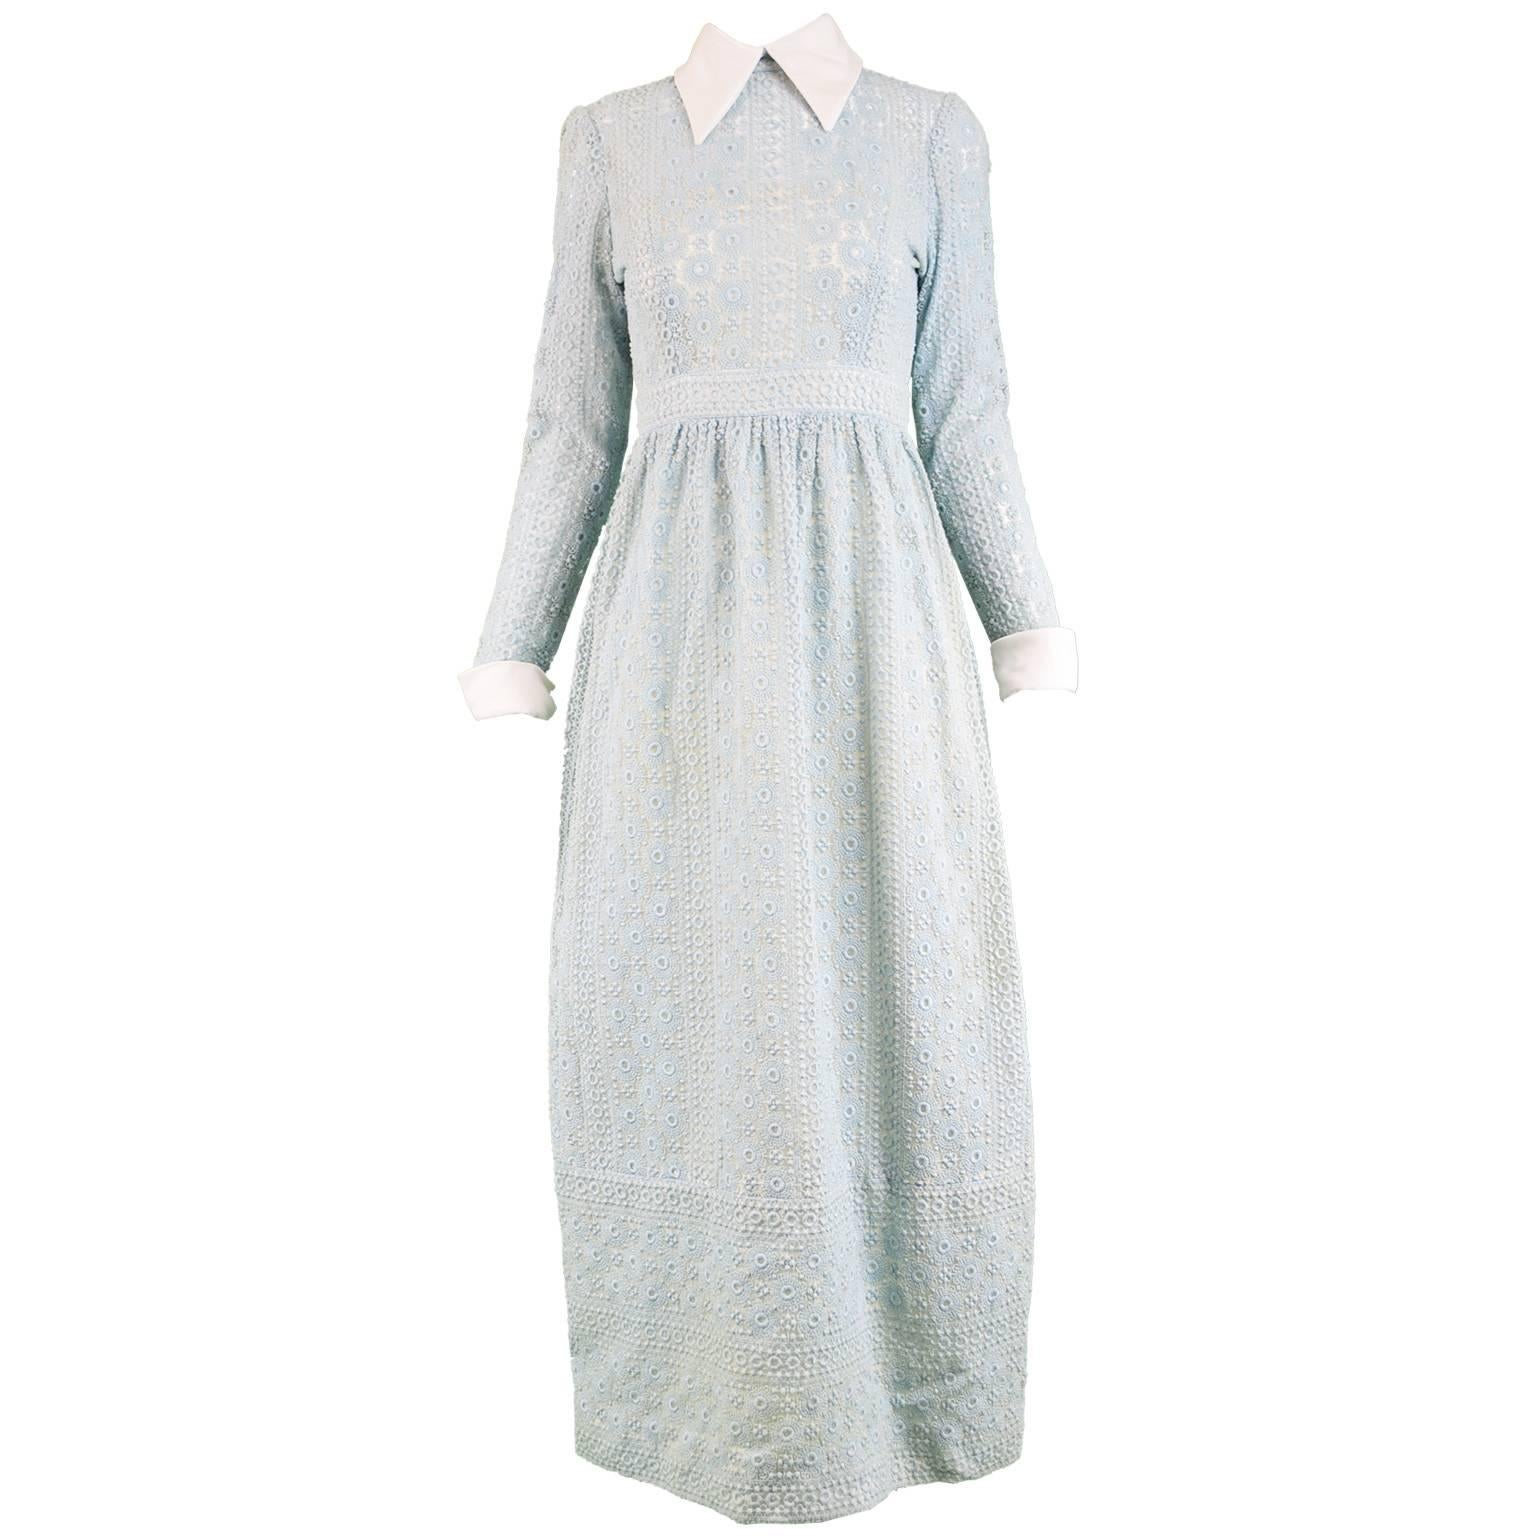 Victor Costa Pale Mint Broderie Anglaise & Organza Maxi Dress, 1970s For Sale